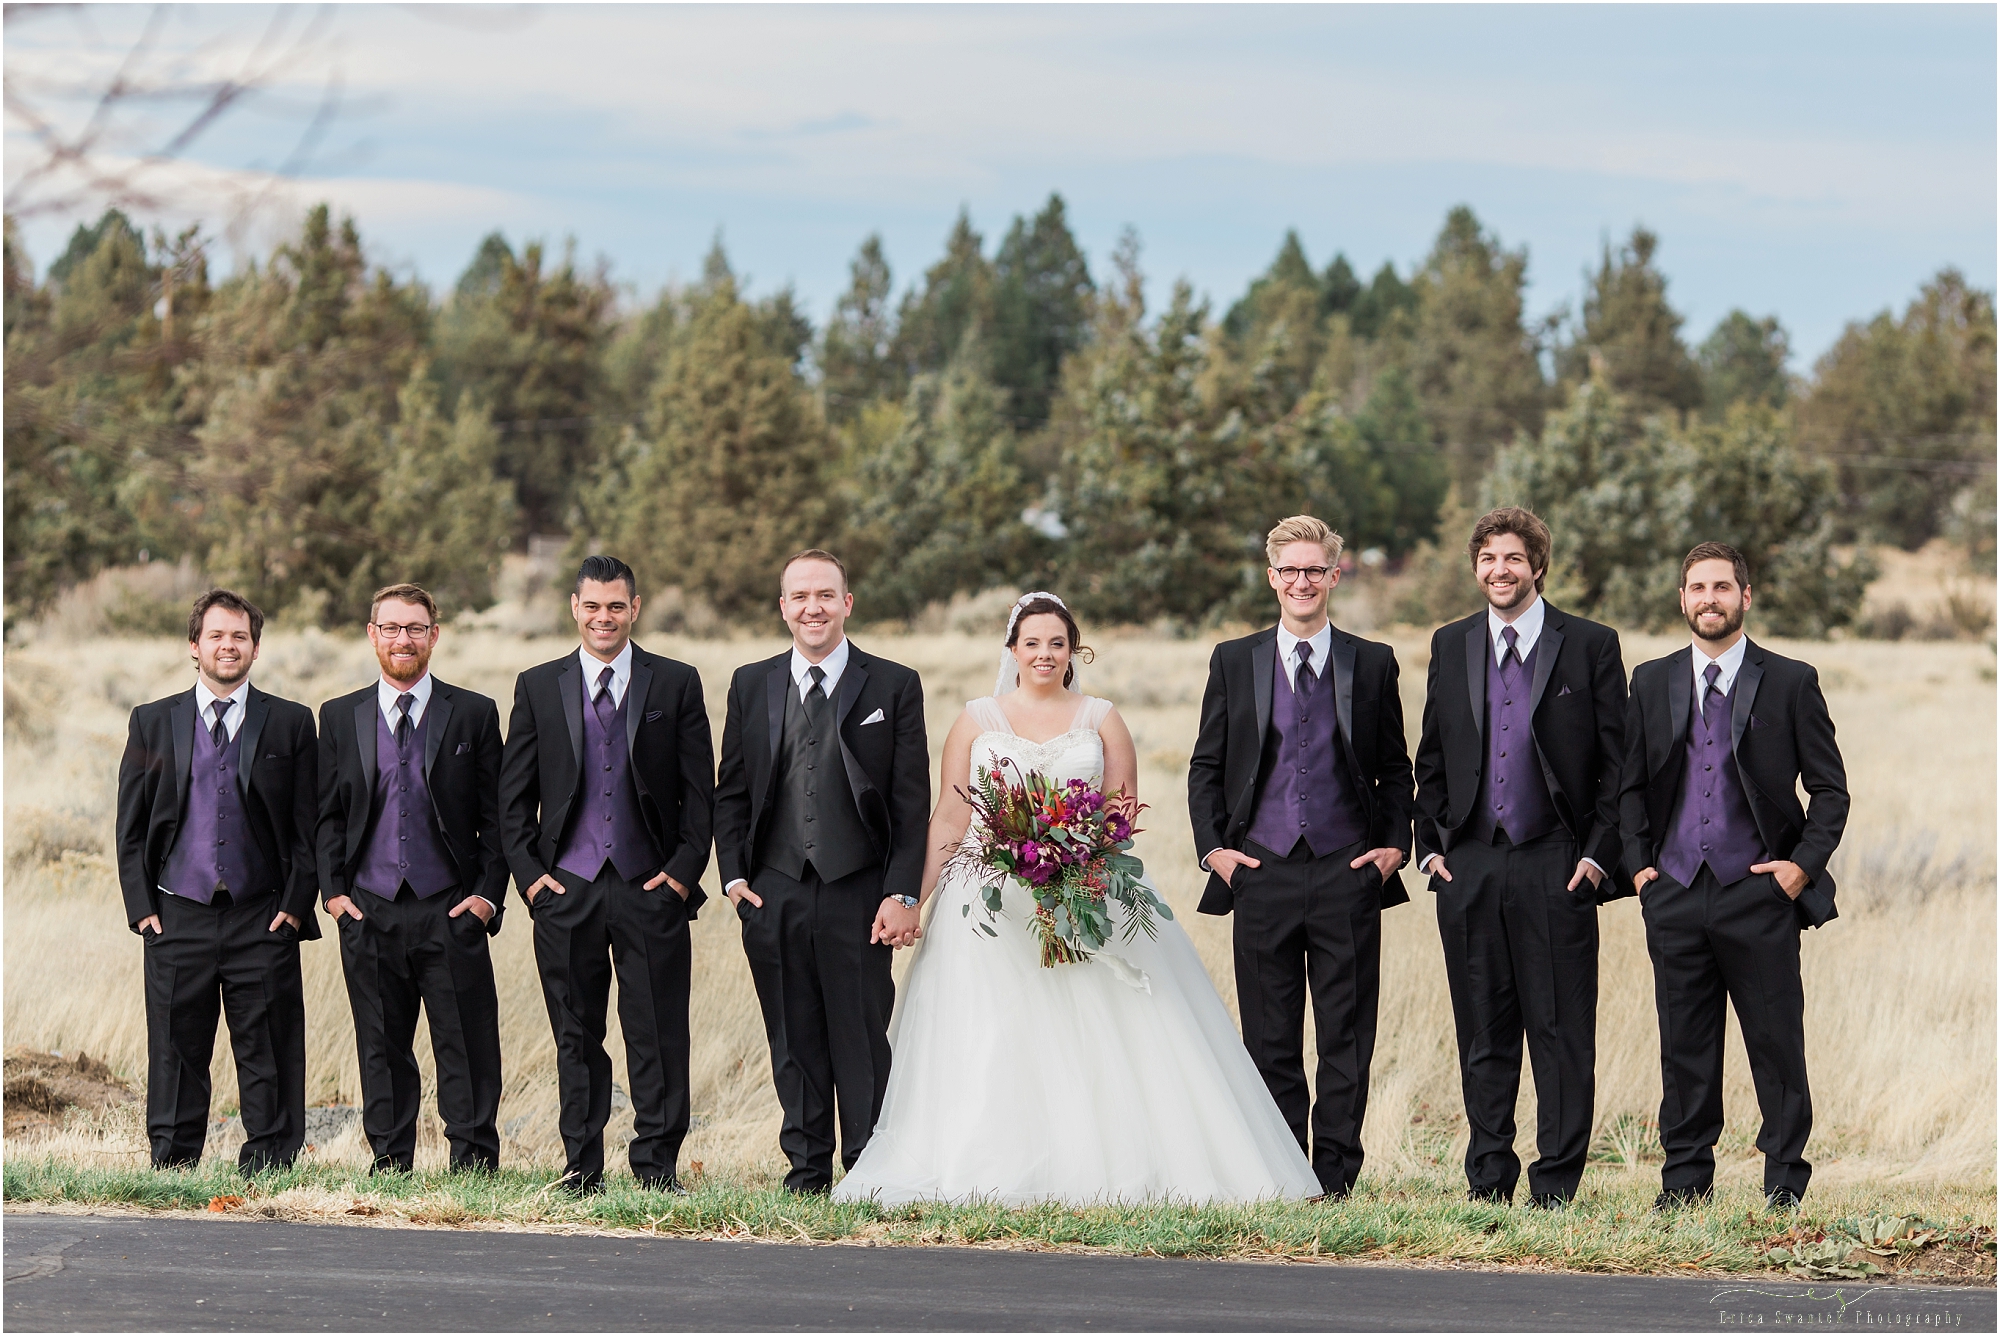 The bride and groom pose with the groomsmen outside of Bend's Seventh Day Adventist Church. 